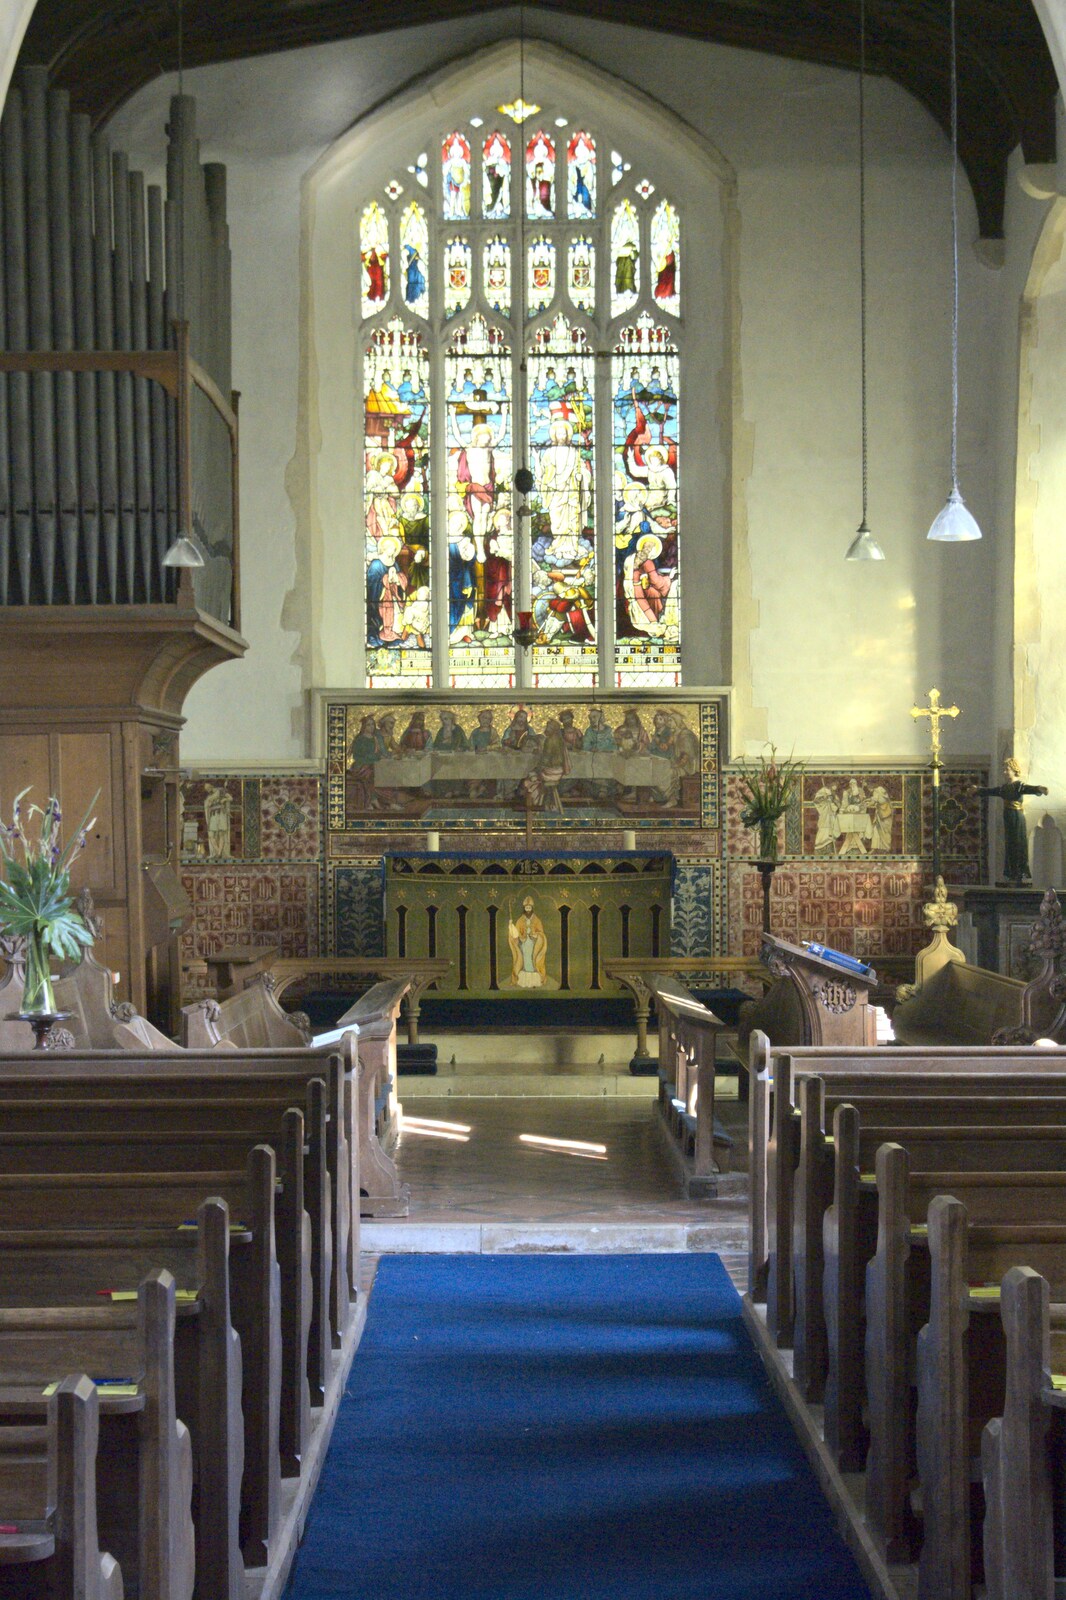 The nave of St. Mary, Brome from October Miscellany: A Ride to Oakley Church - 4th October 2009